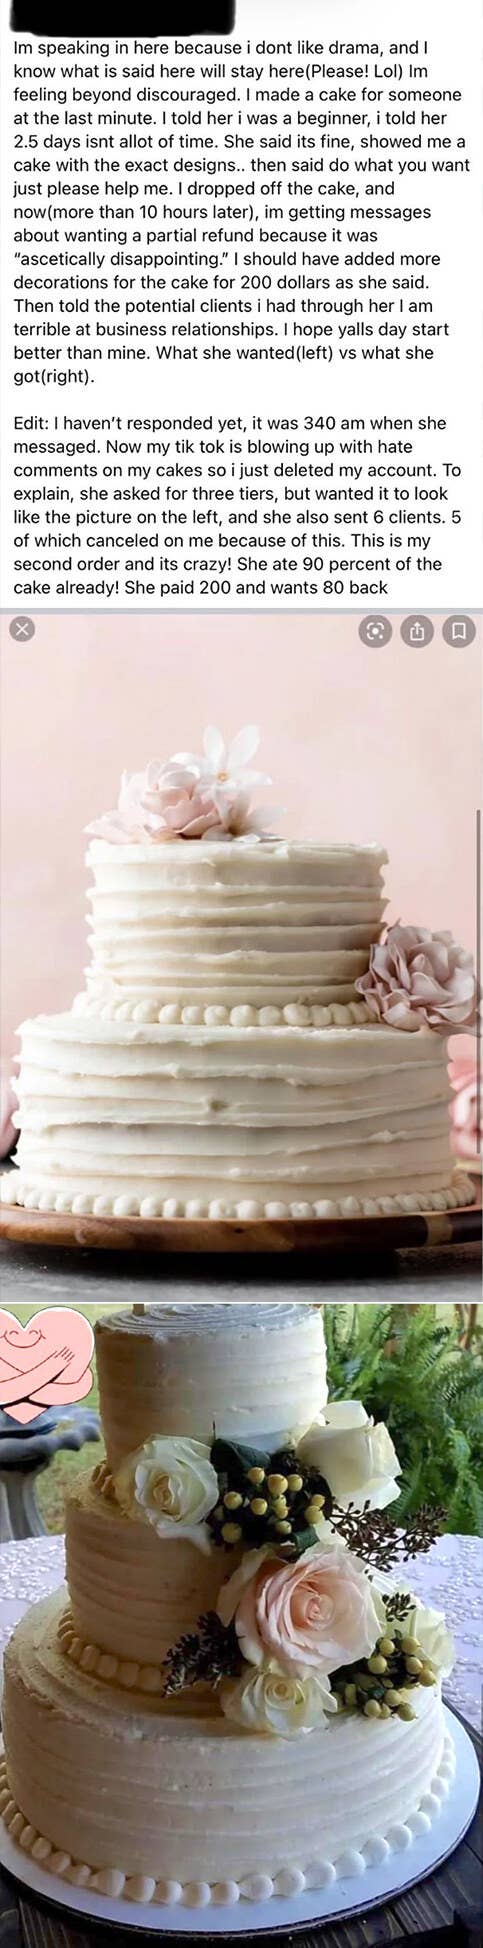 A person sharing their experience of making a cake for an entitled bride